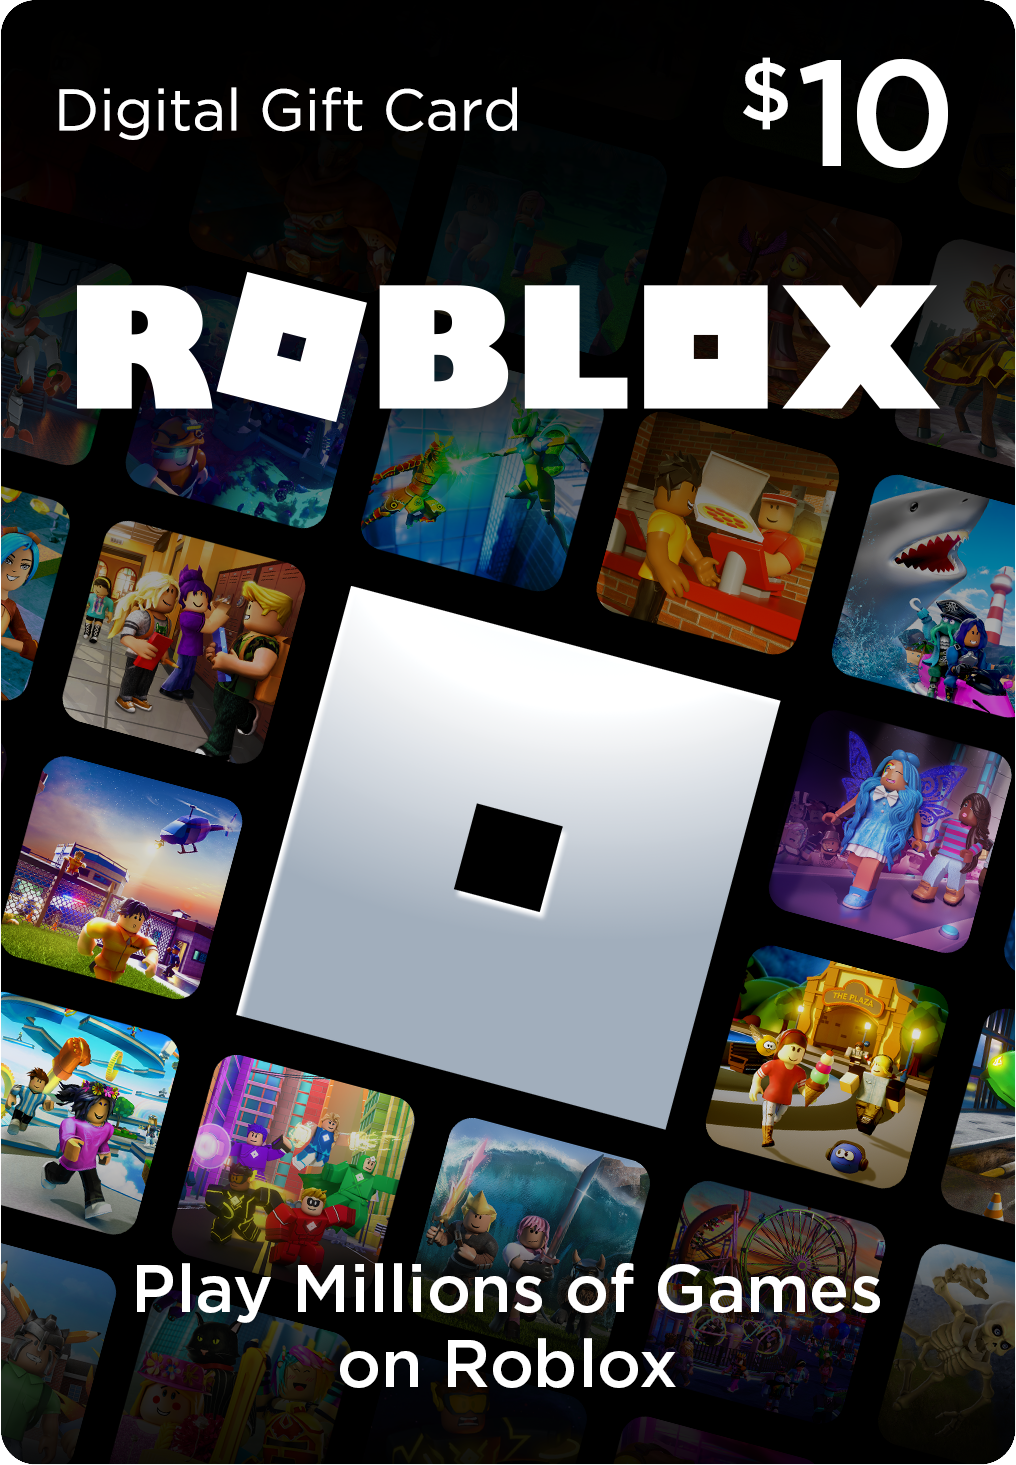 How To Transfer Robux To Friends